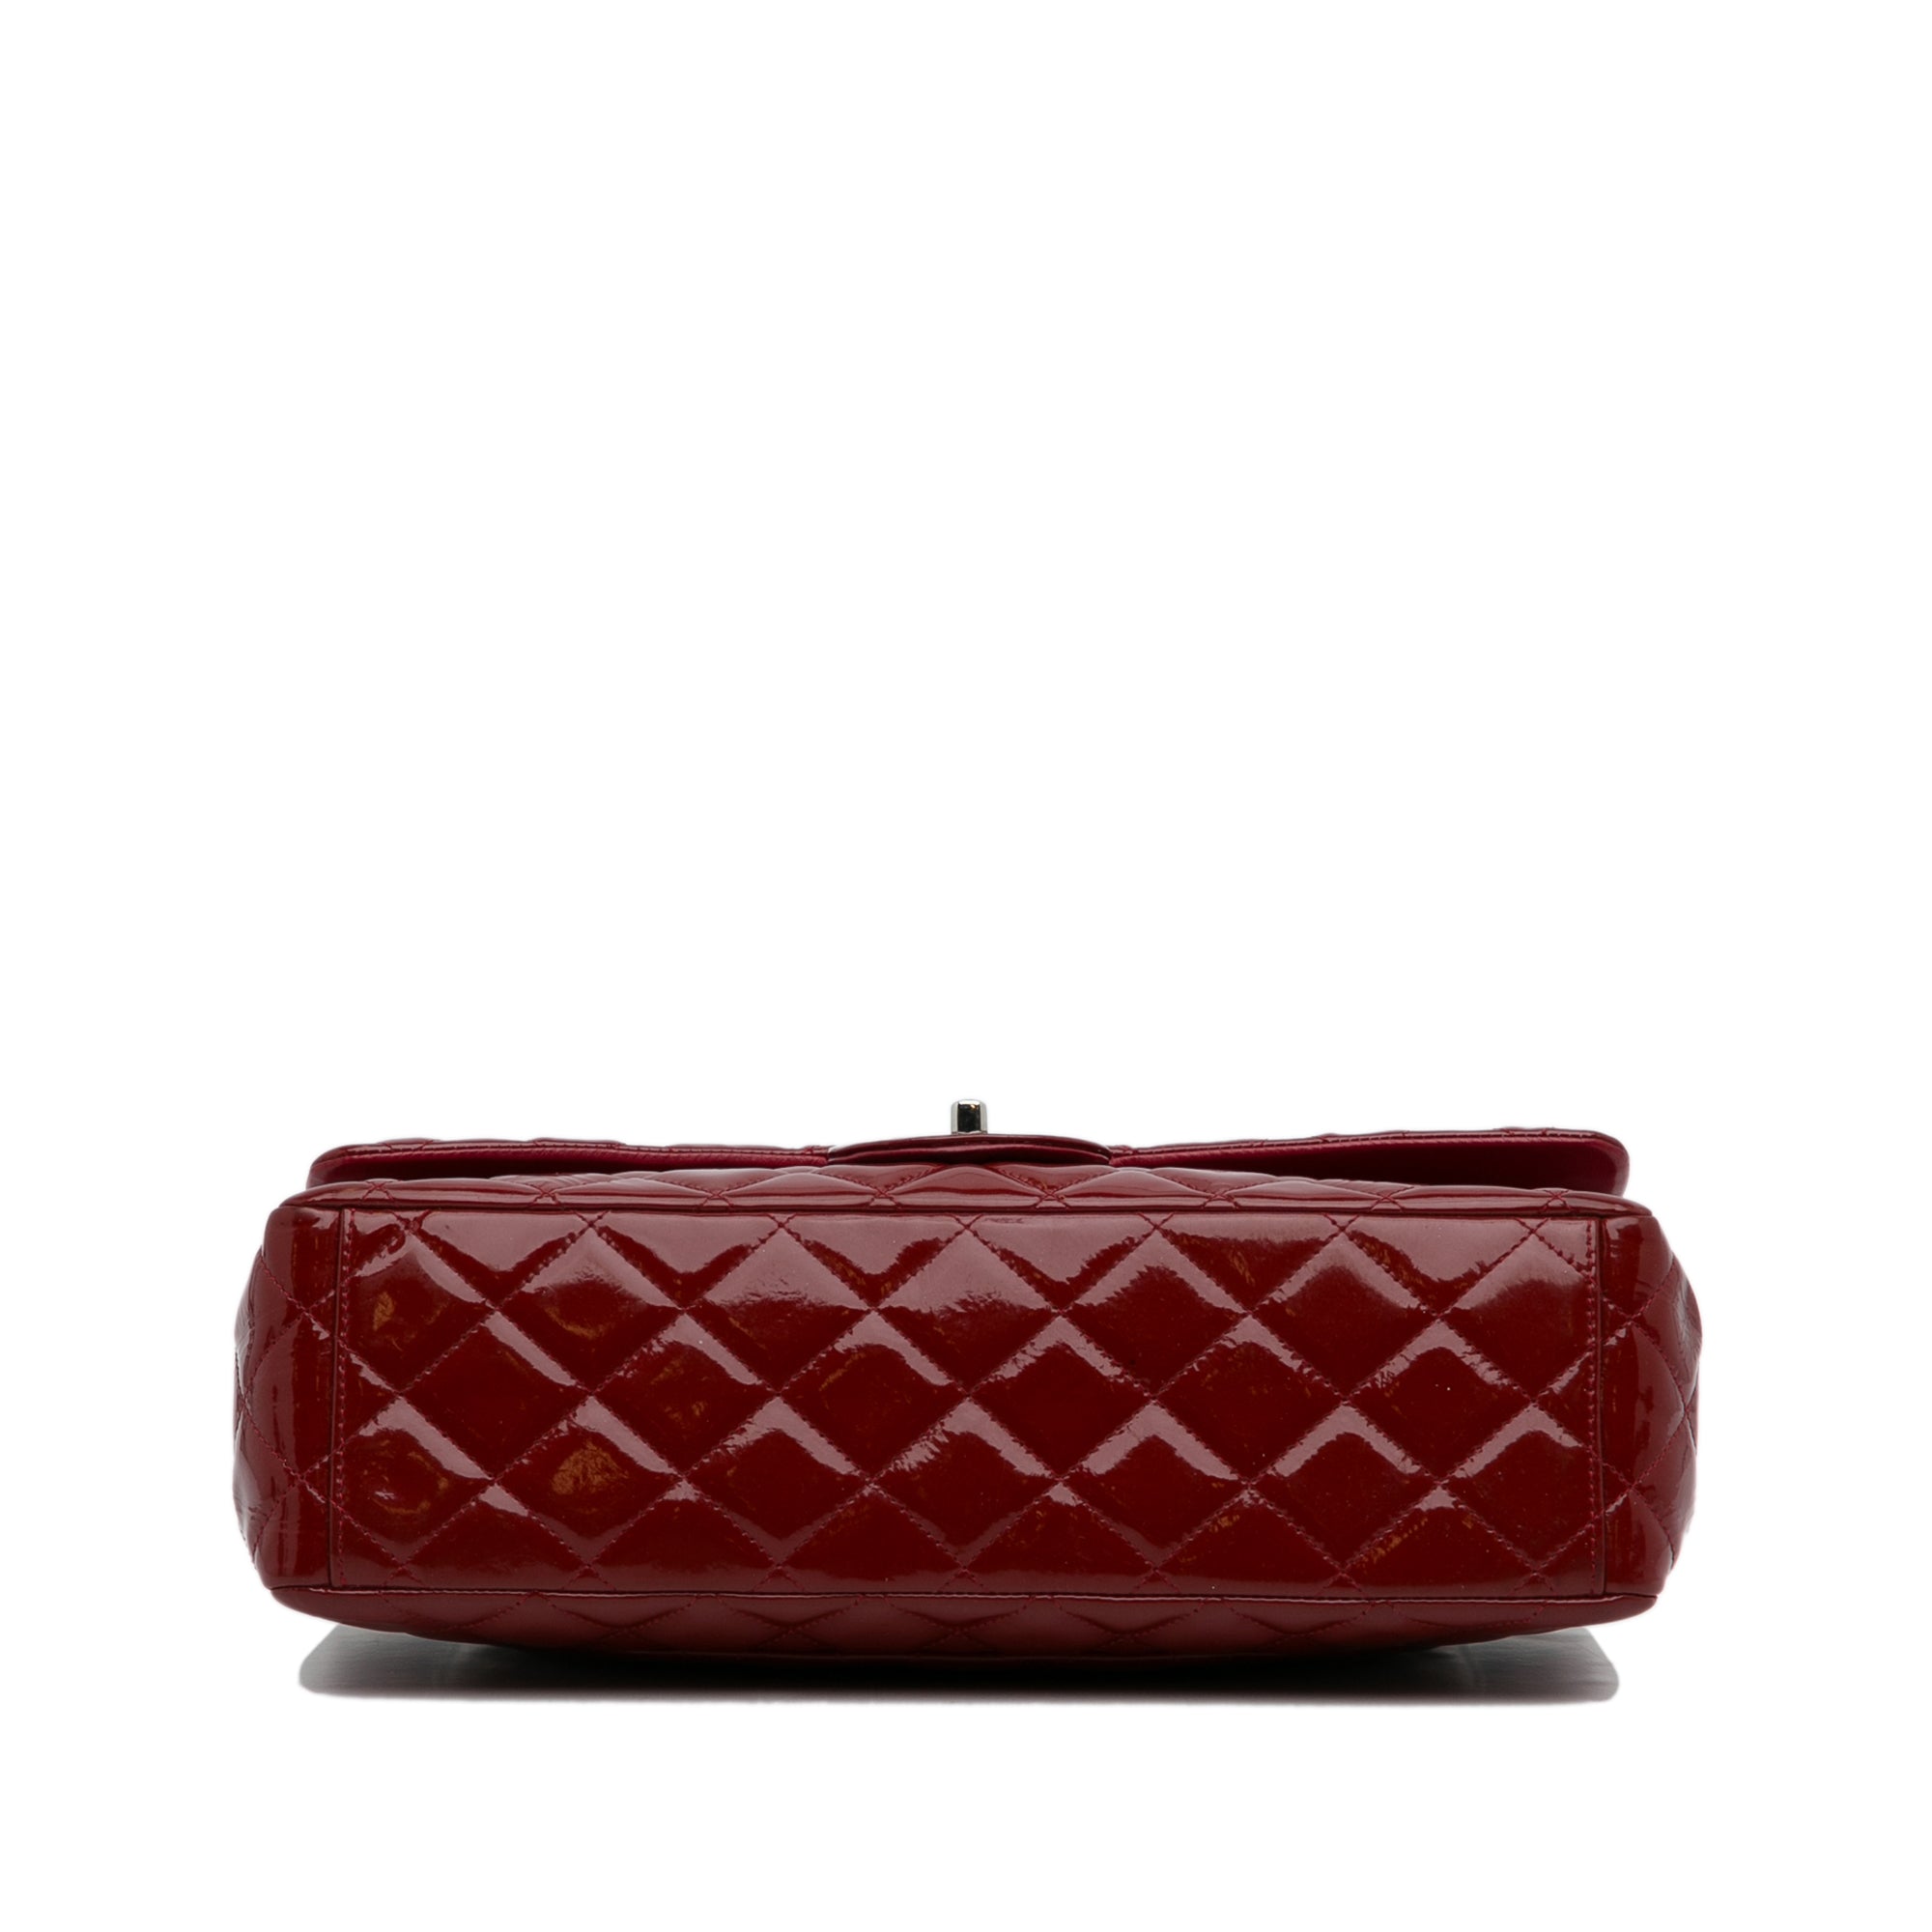 Chanel Straw Bird Bag, Red Chanel Maxi Classic Patent Leather Double Flap  Bag